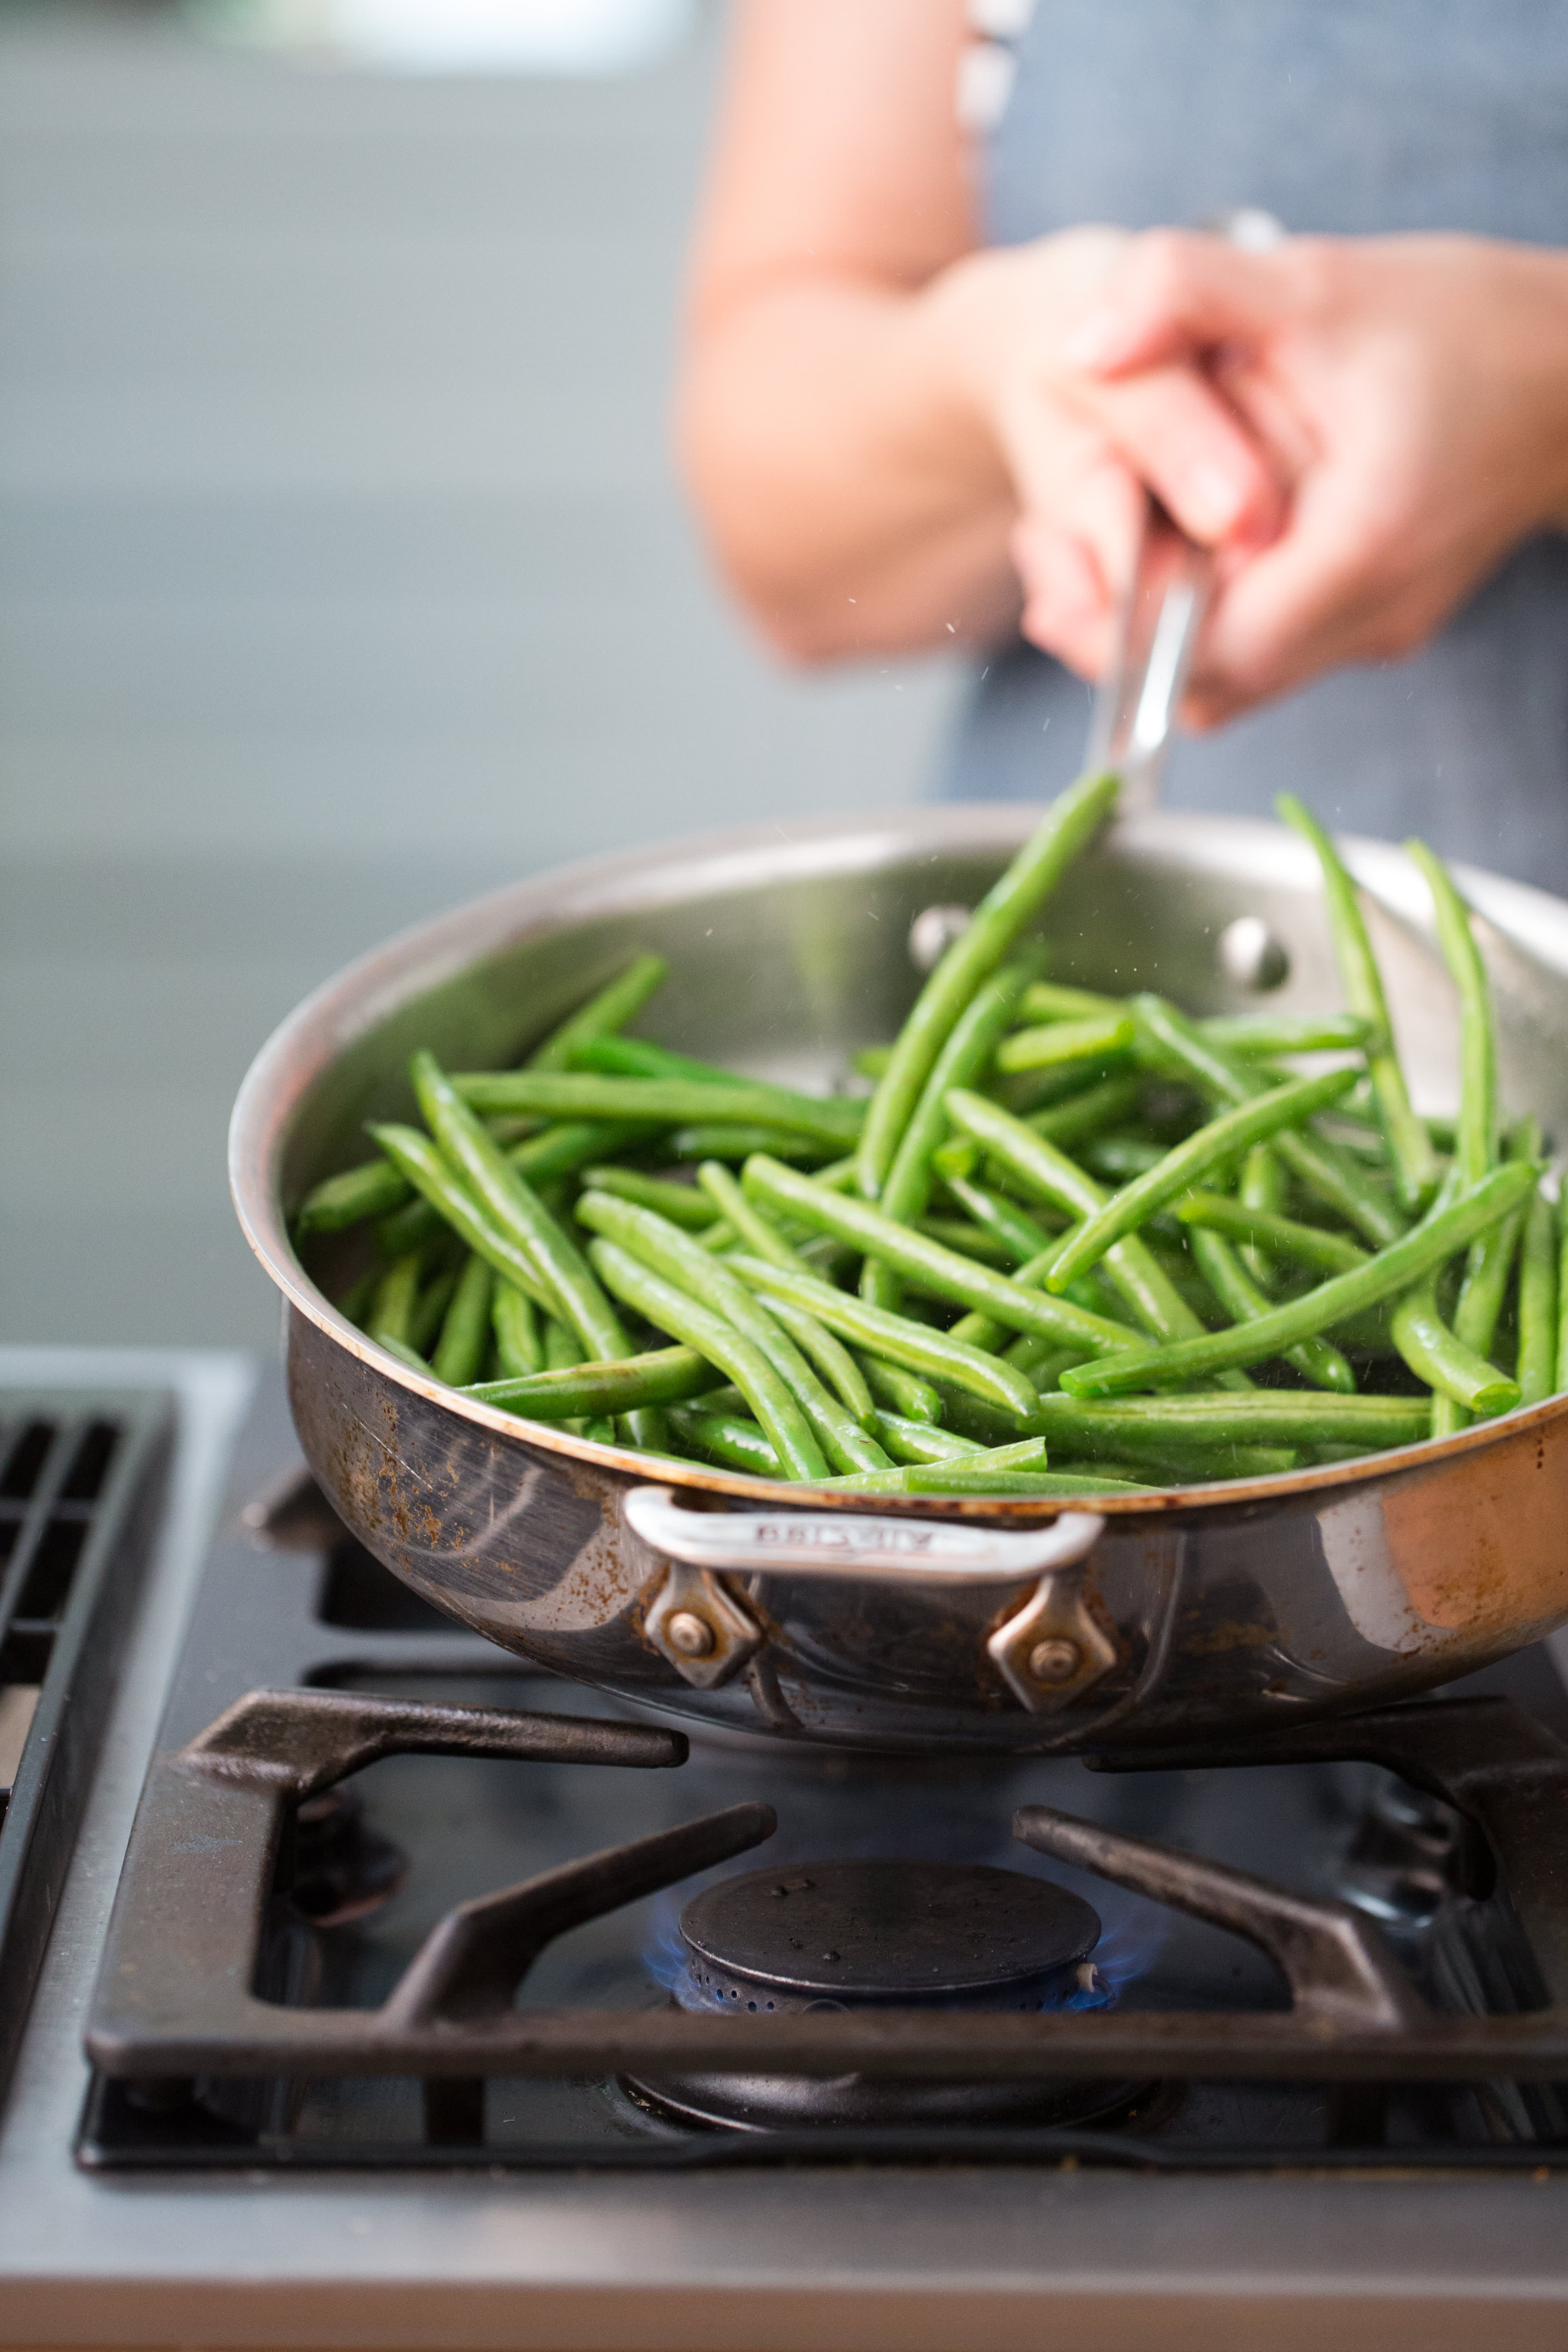 How To Cook Green Beans - Stovetop | Kitchn